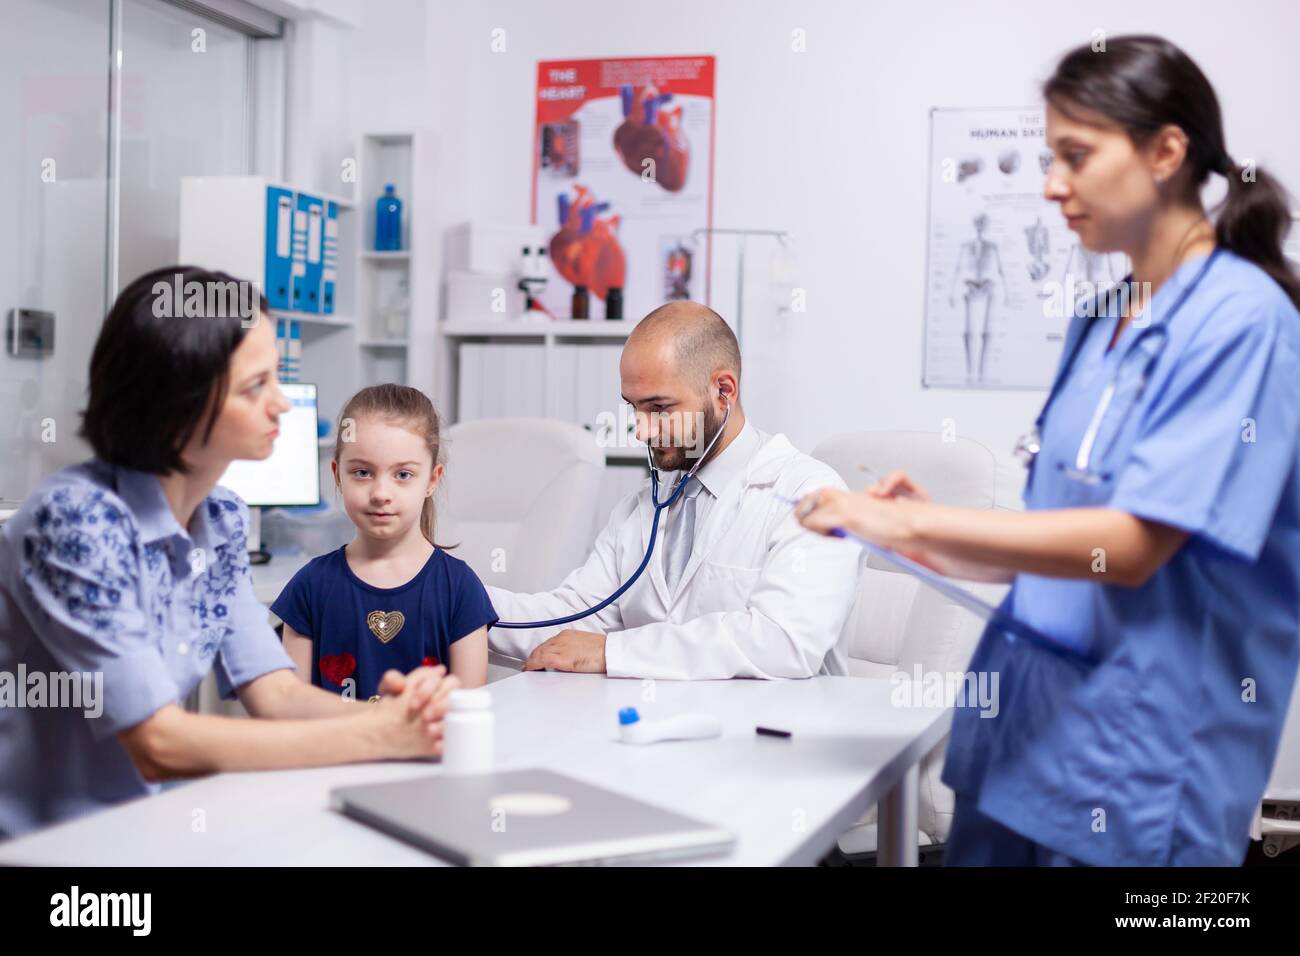 Doctor pediatry checking evolution of flu using stethoscope and nurse writing disease symptoms. Healthcare practitioner in medicine providing professional treatment services in hospital clinic. Stock Photo